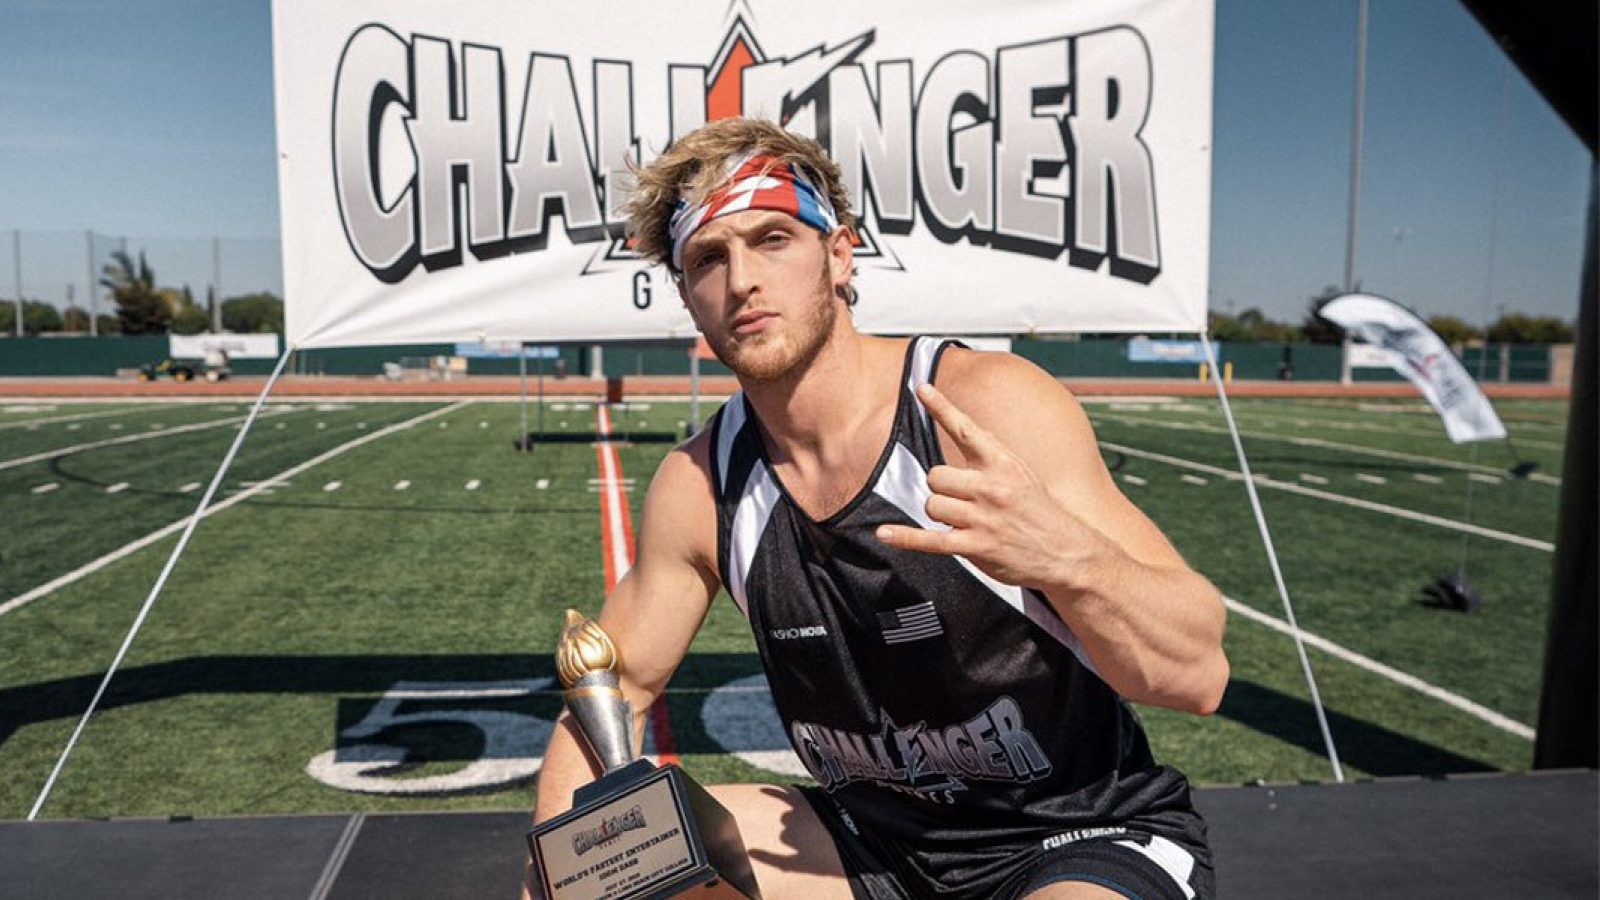 Logan Paul suffers injury and comes dead last in Challenger Games